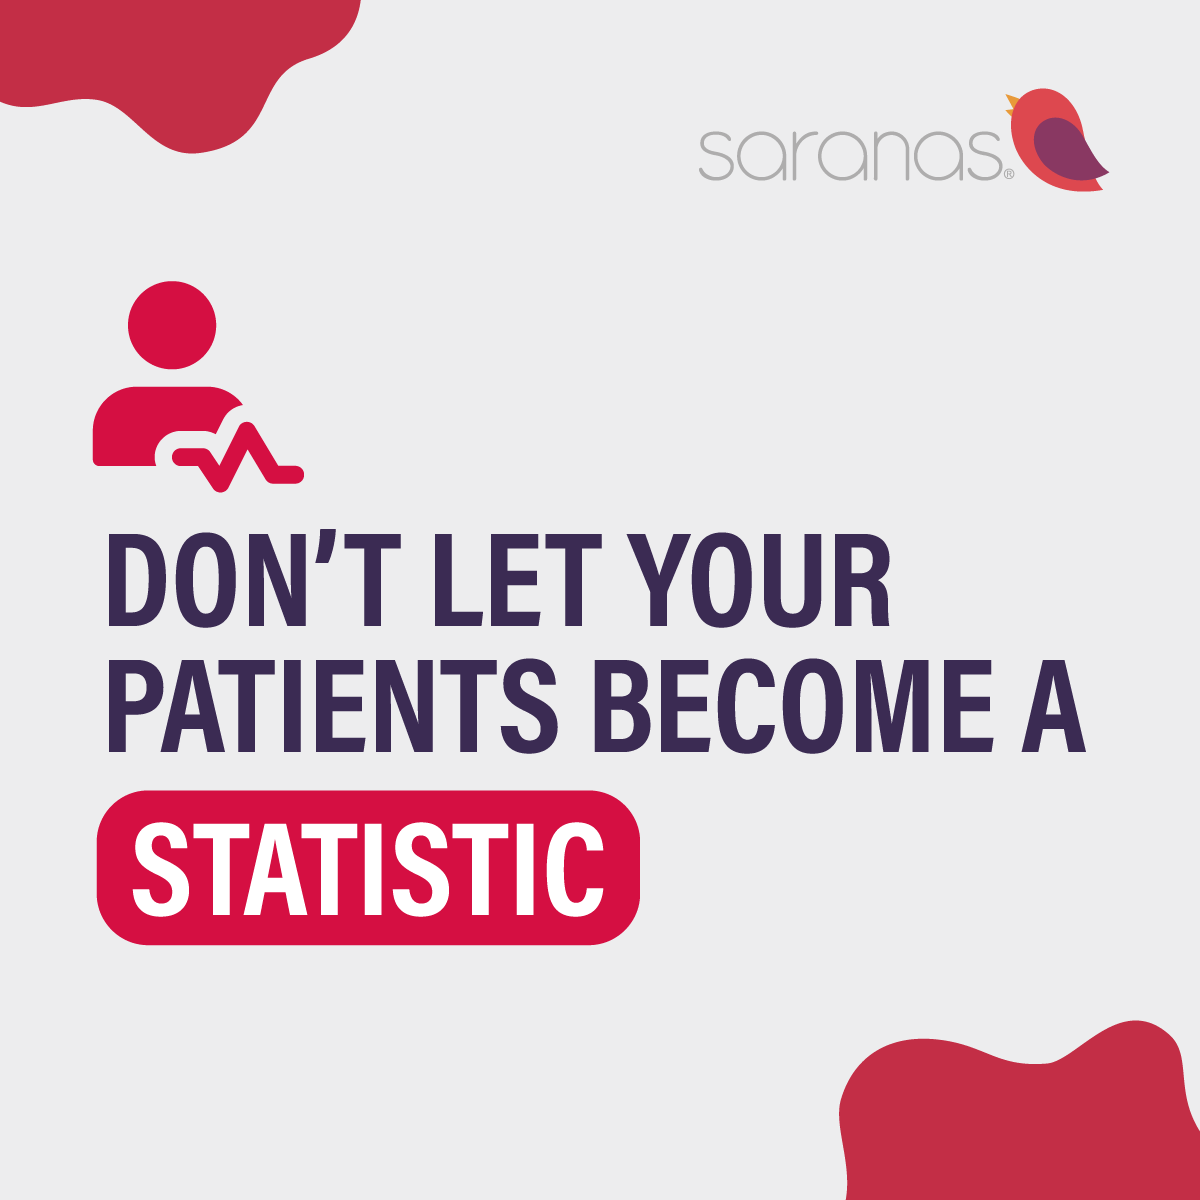 Protect your patients and your practice by implementing this game-changing tech today! [3/3]
#PatientSafety #CardiologyResearch